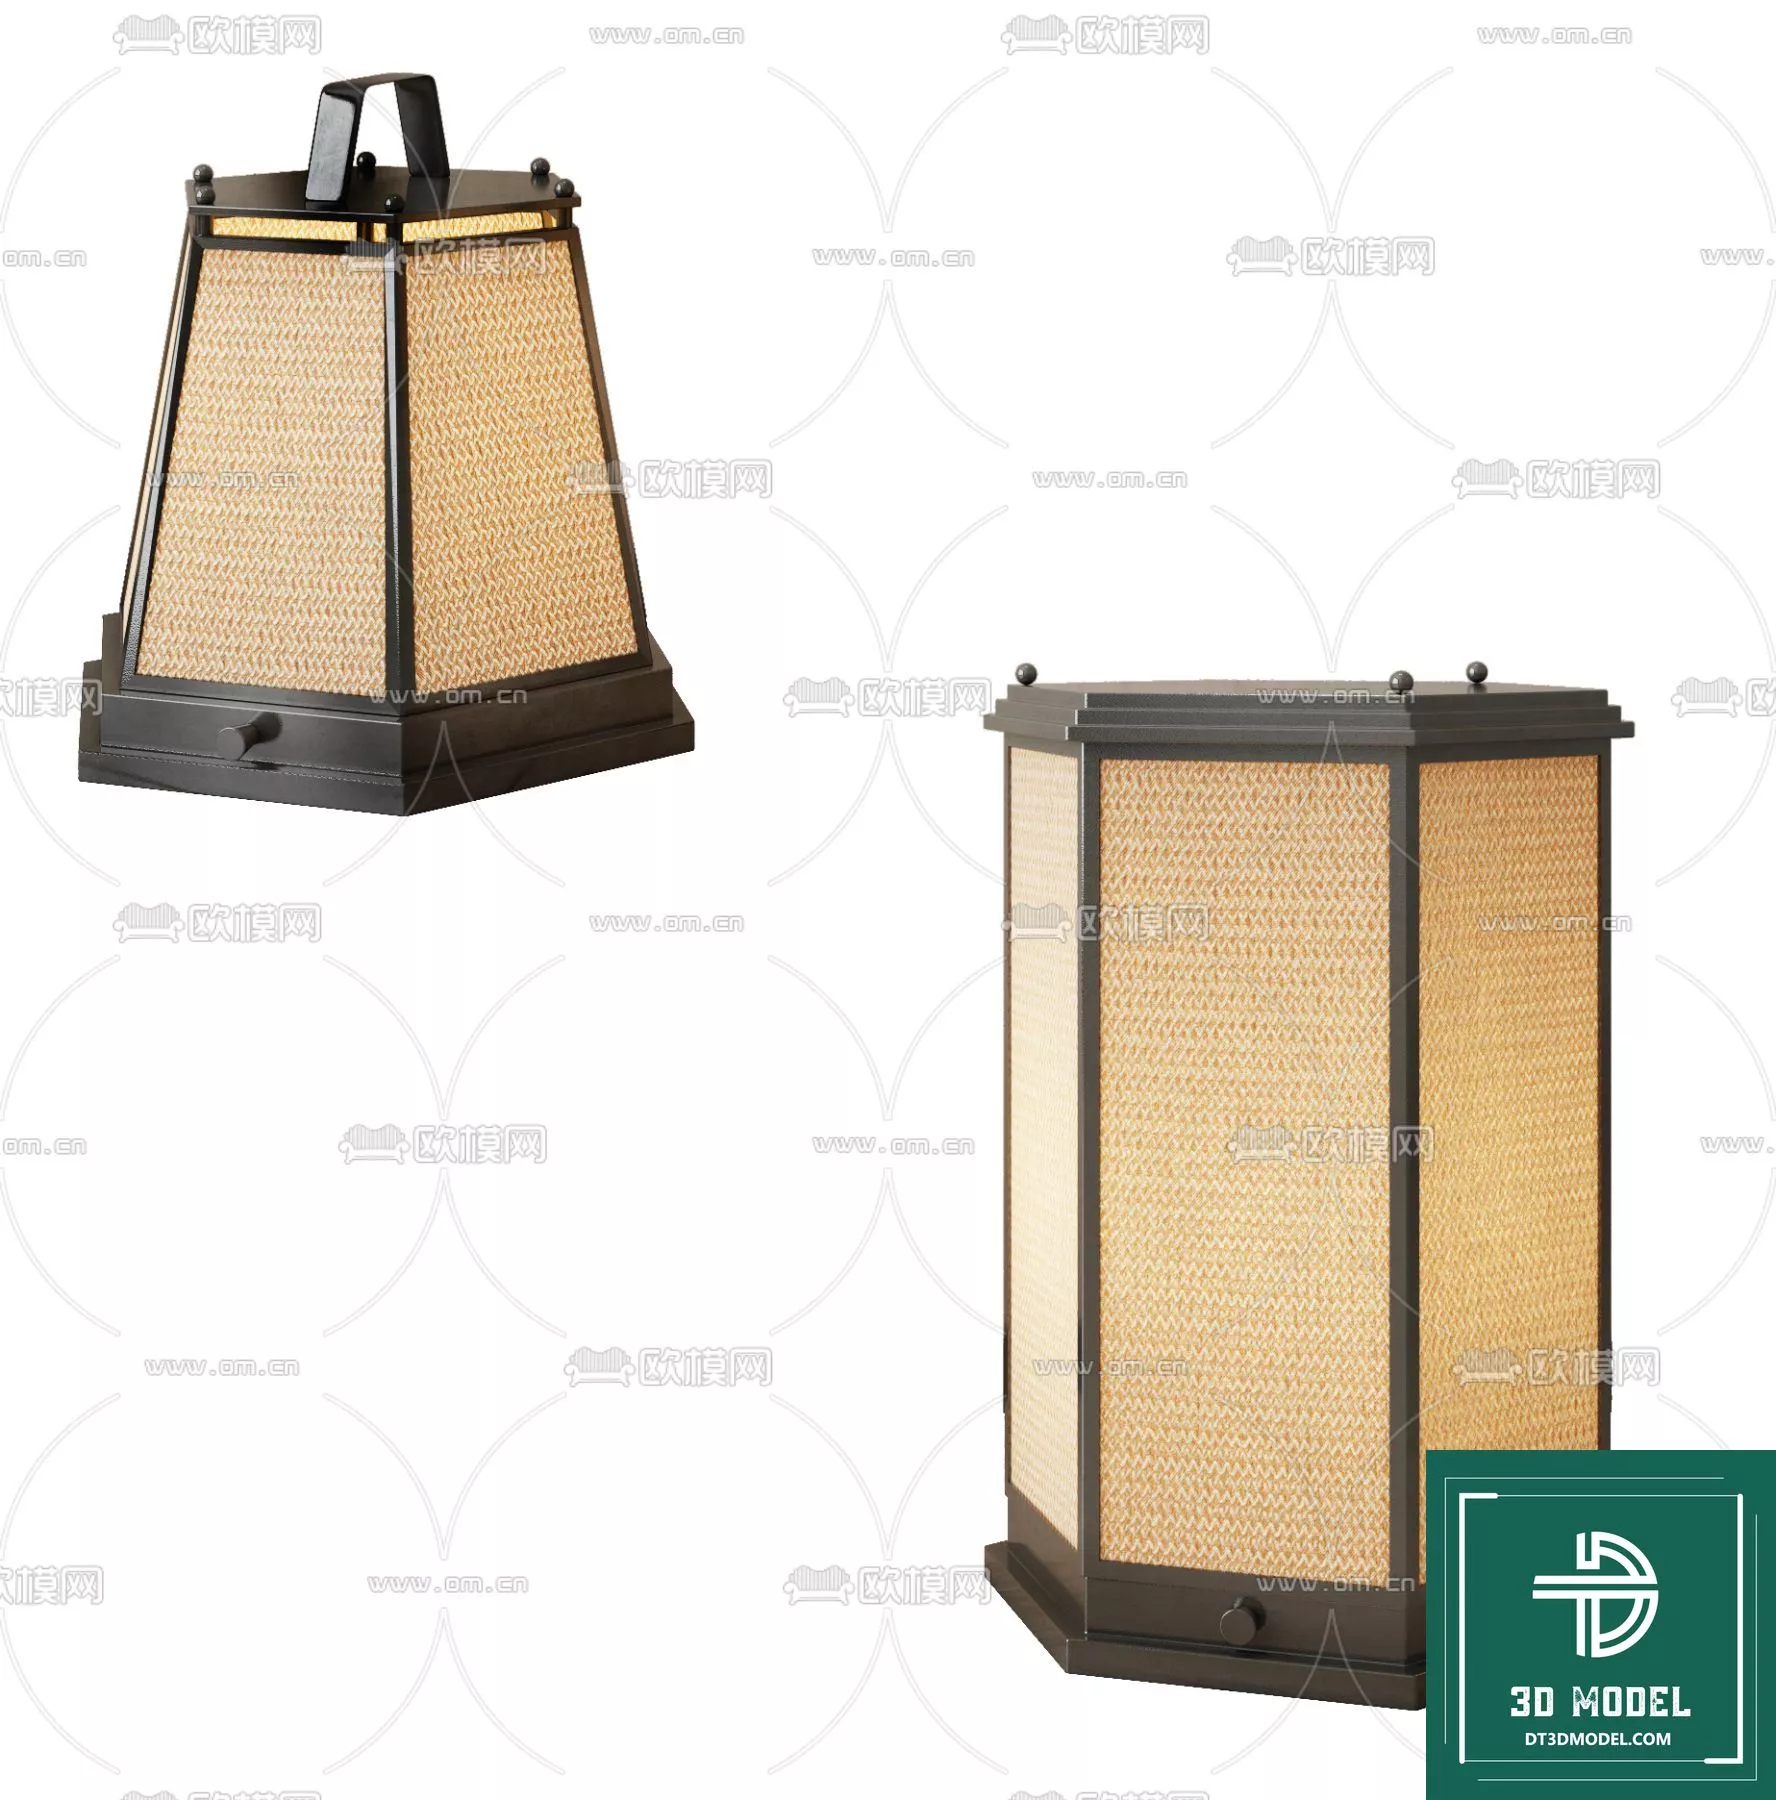 MODERN TABLE LAMP - SKETCHUP 3D MODEL - VRAY OR ENSCAPE - ID14595